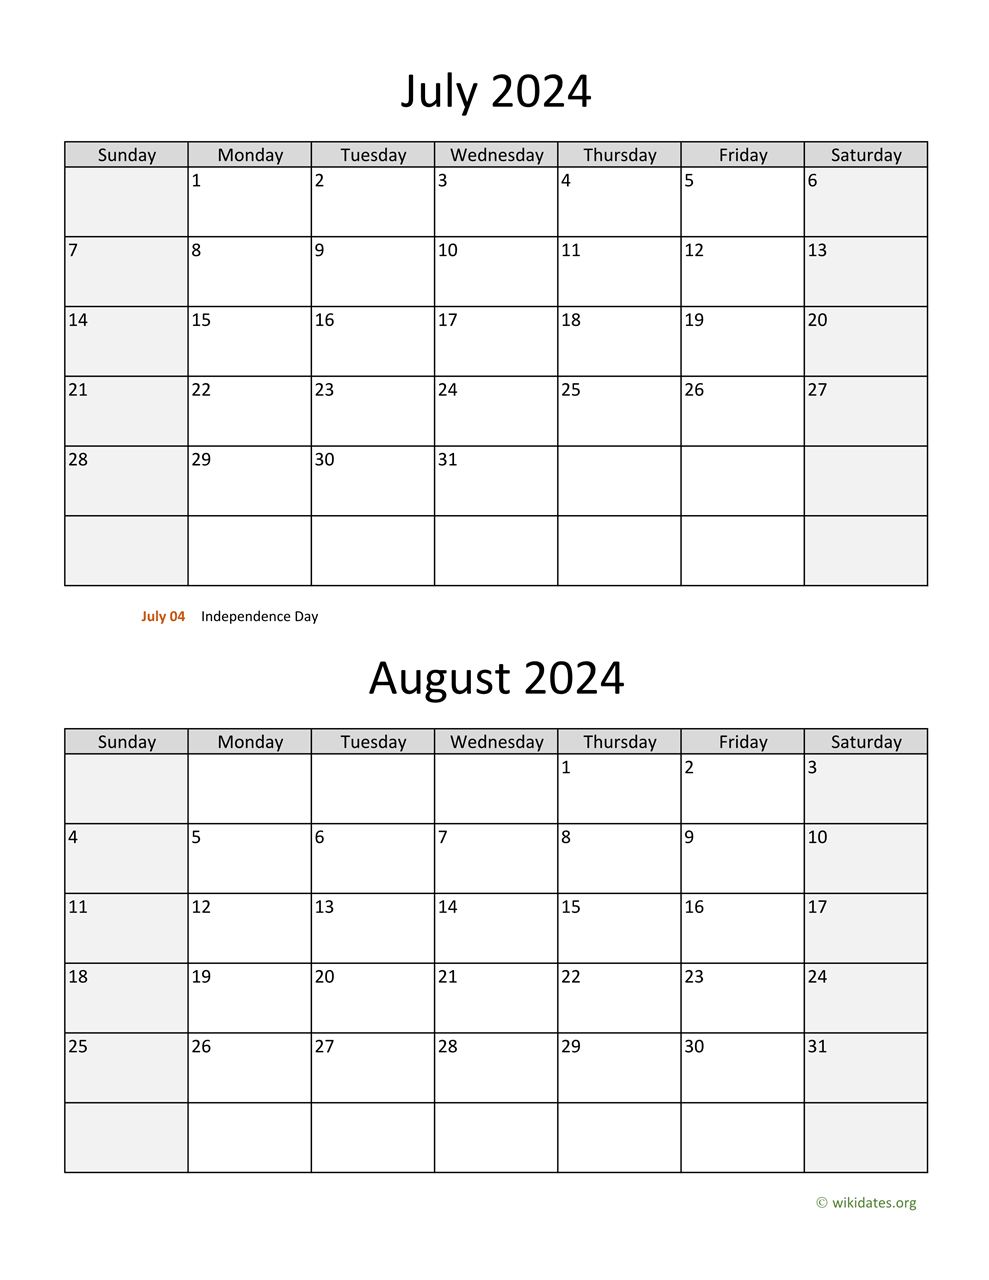 July And August 2024 Calendar | Wikidates for Printable Calendar For July And August 2024